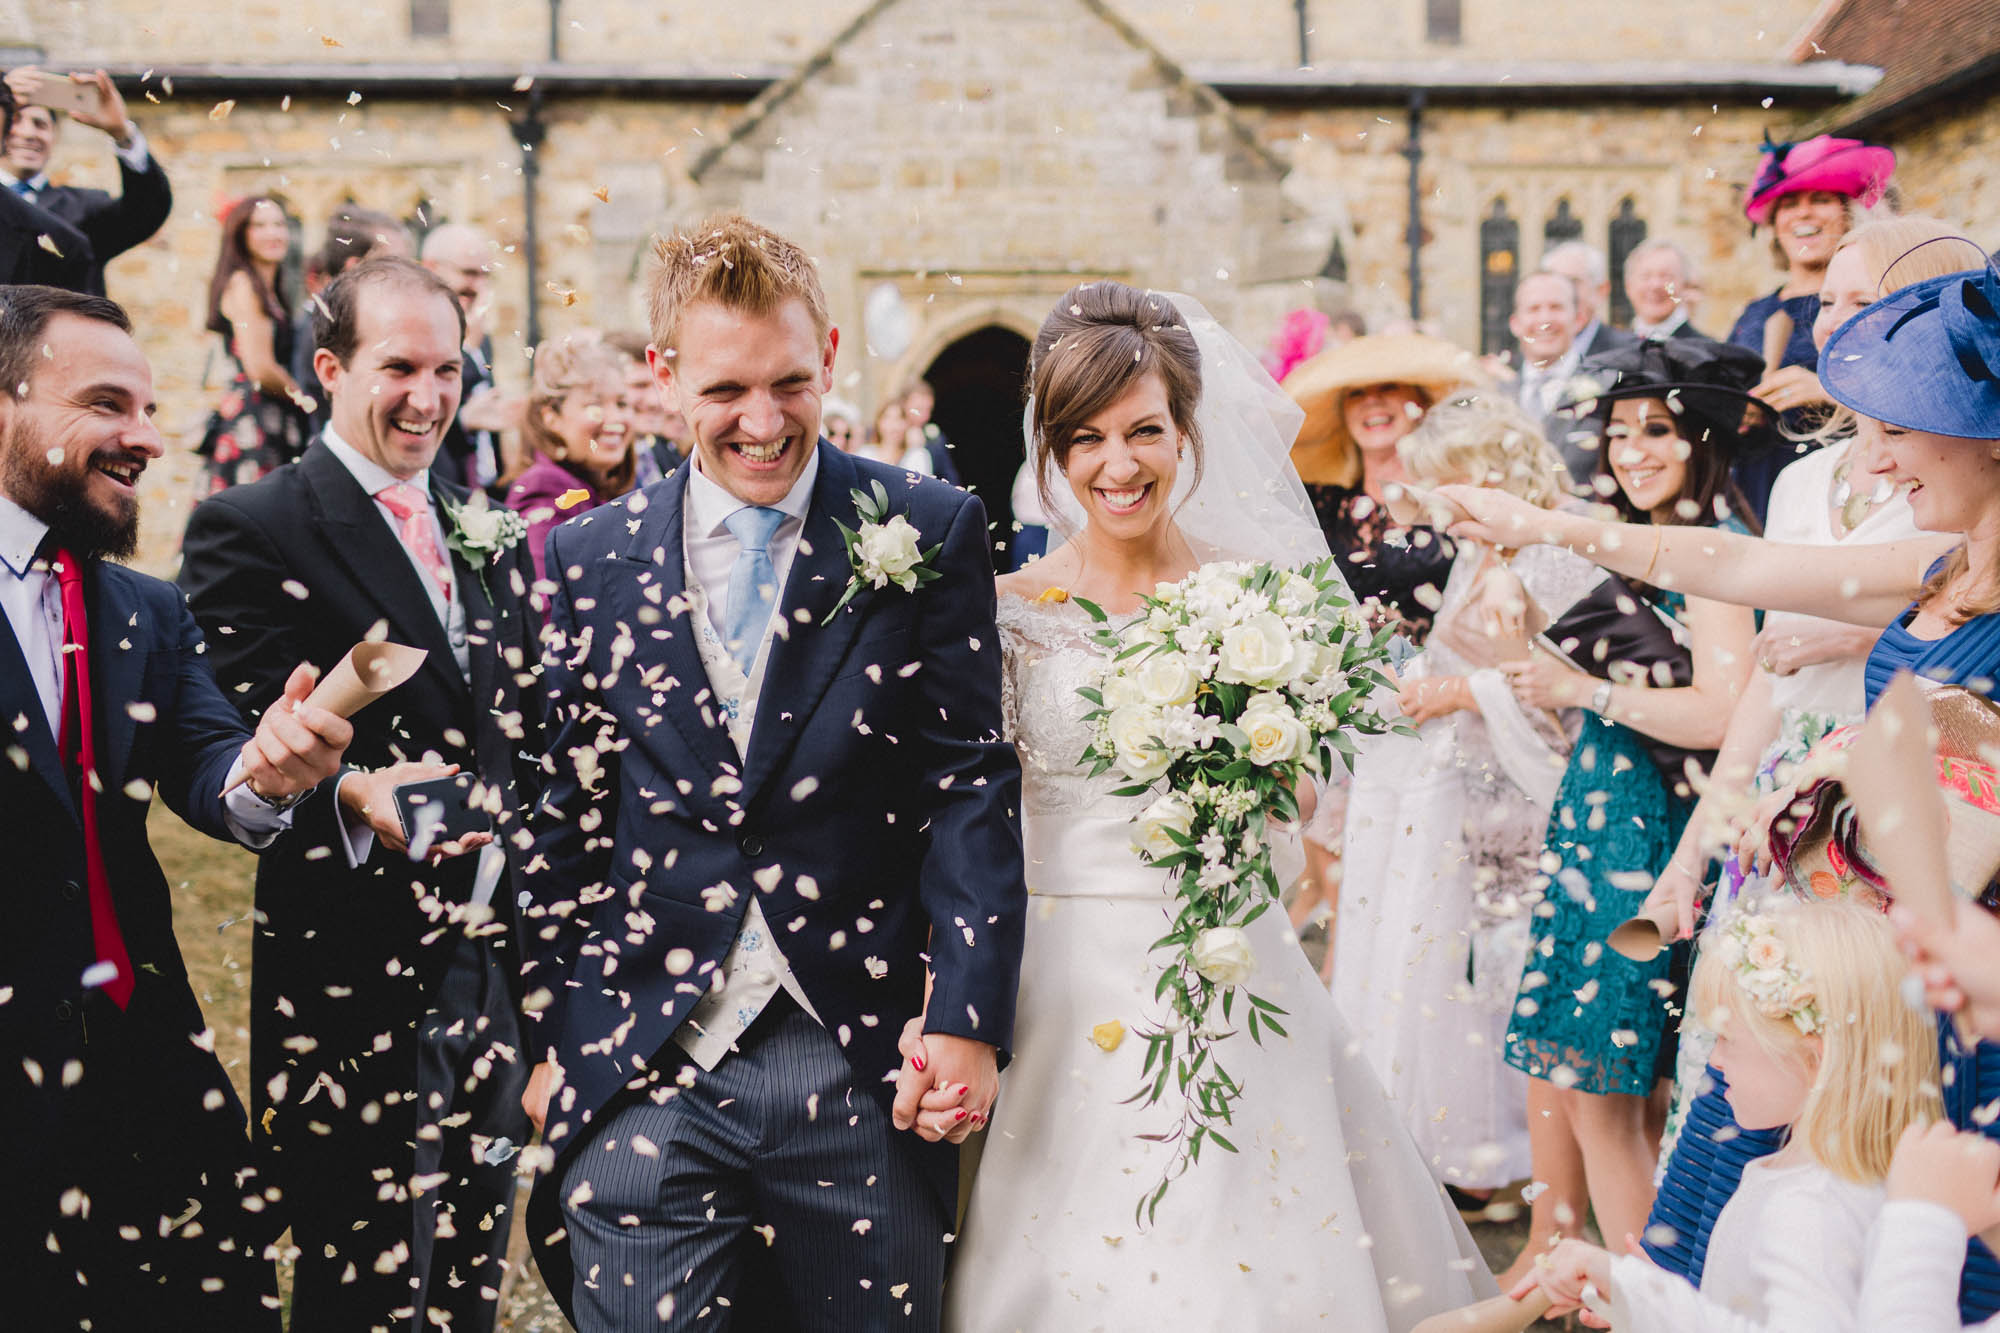 Wedding guests throw confetti at the bride and groom on their wedding day Ashdown Park Wedding Venue in Sussex.